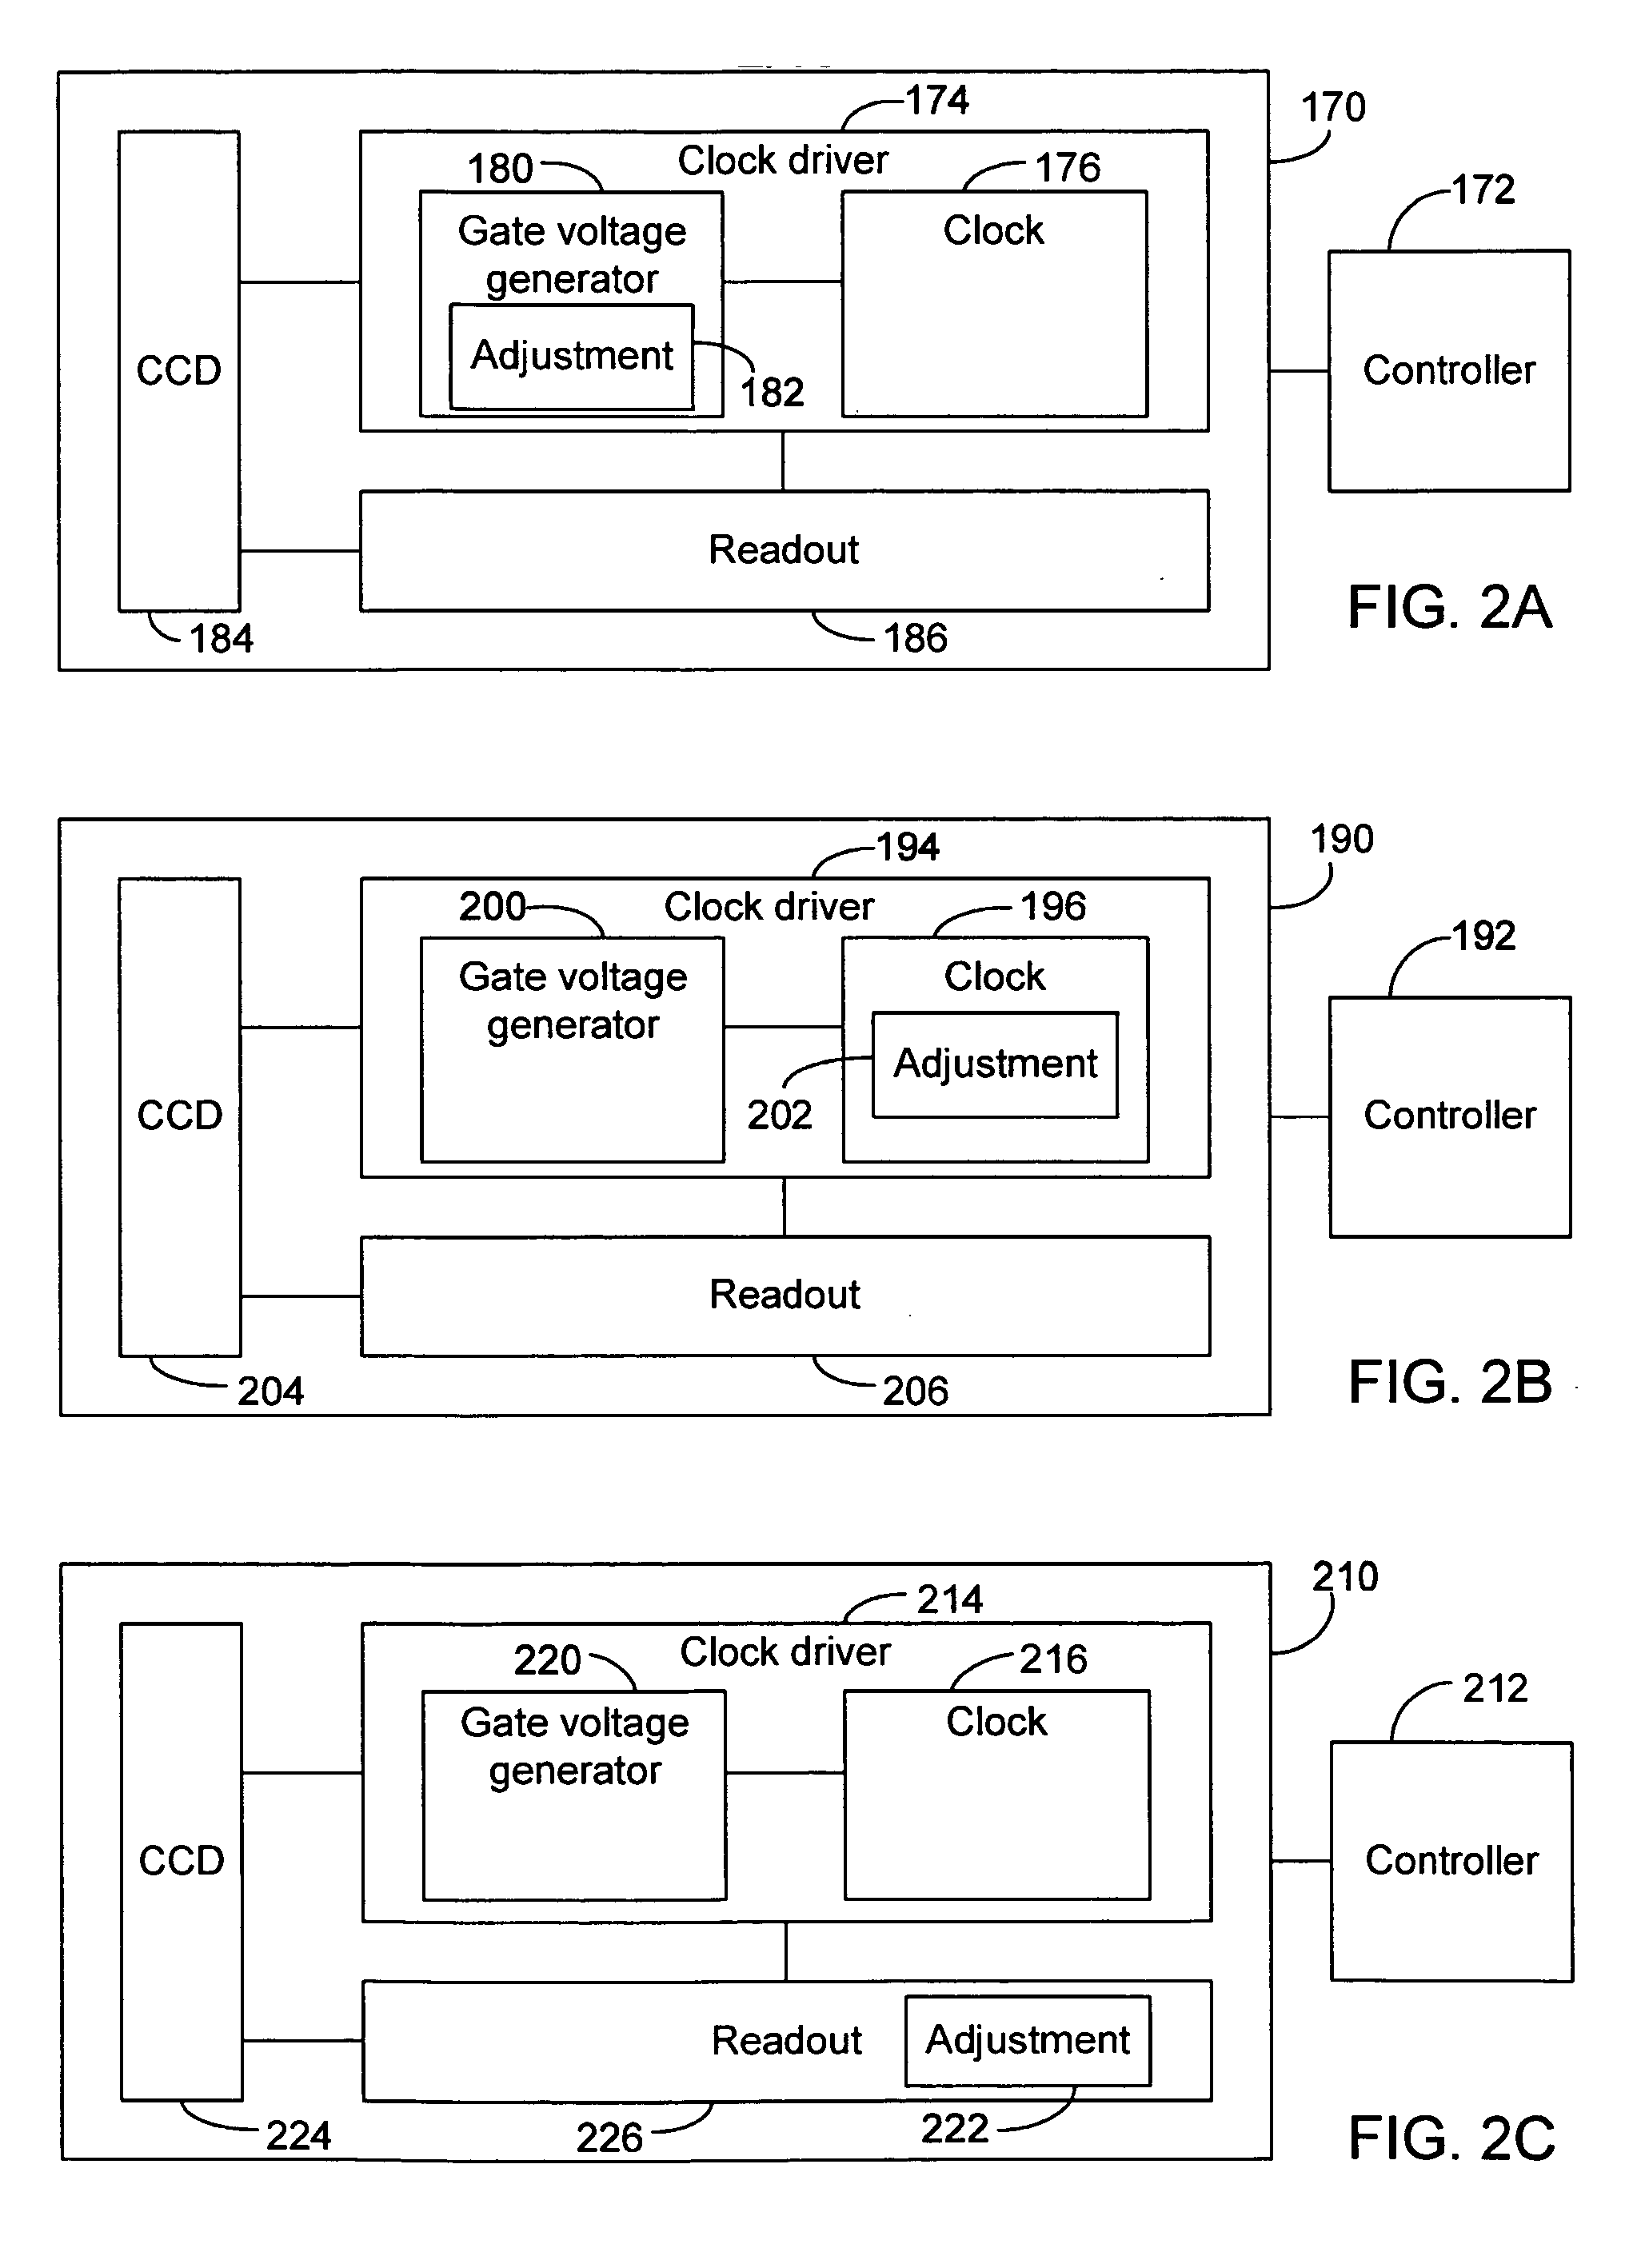 Methods for improving the performance of a detector